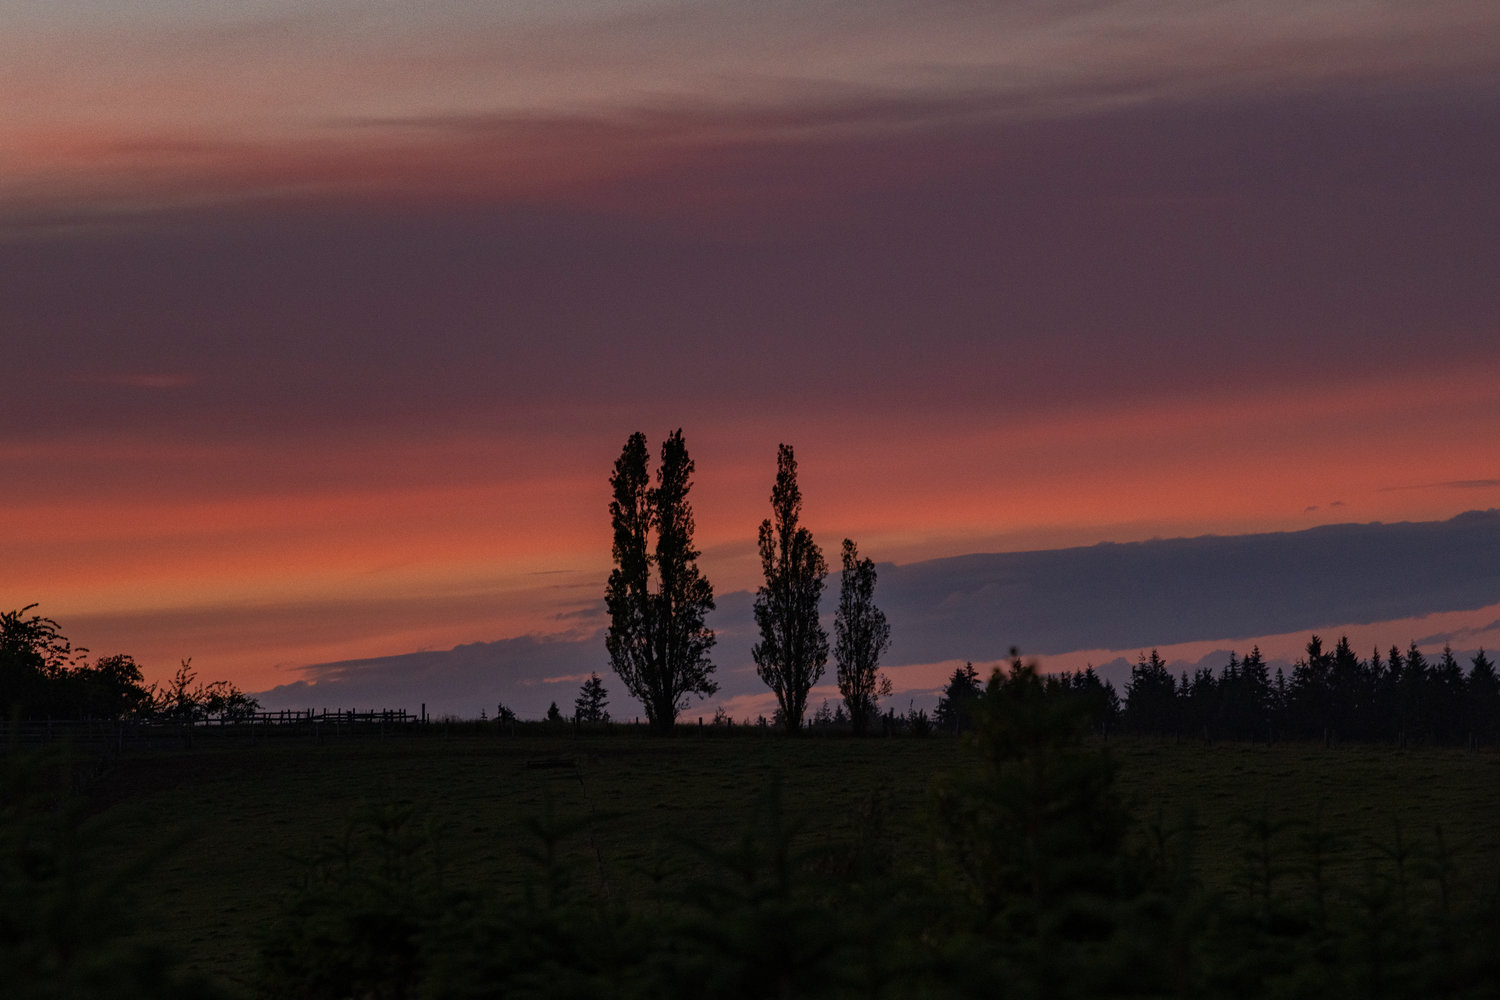 Trees stand on Crego Hill in Adna on Tuesday evening, as ribbons of orange and pink cover the sky after sunset on the longest day of the year.